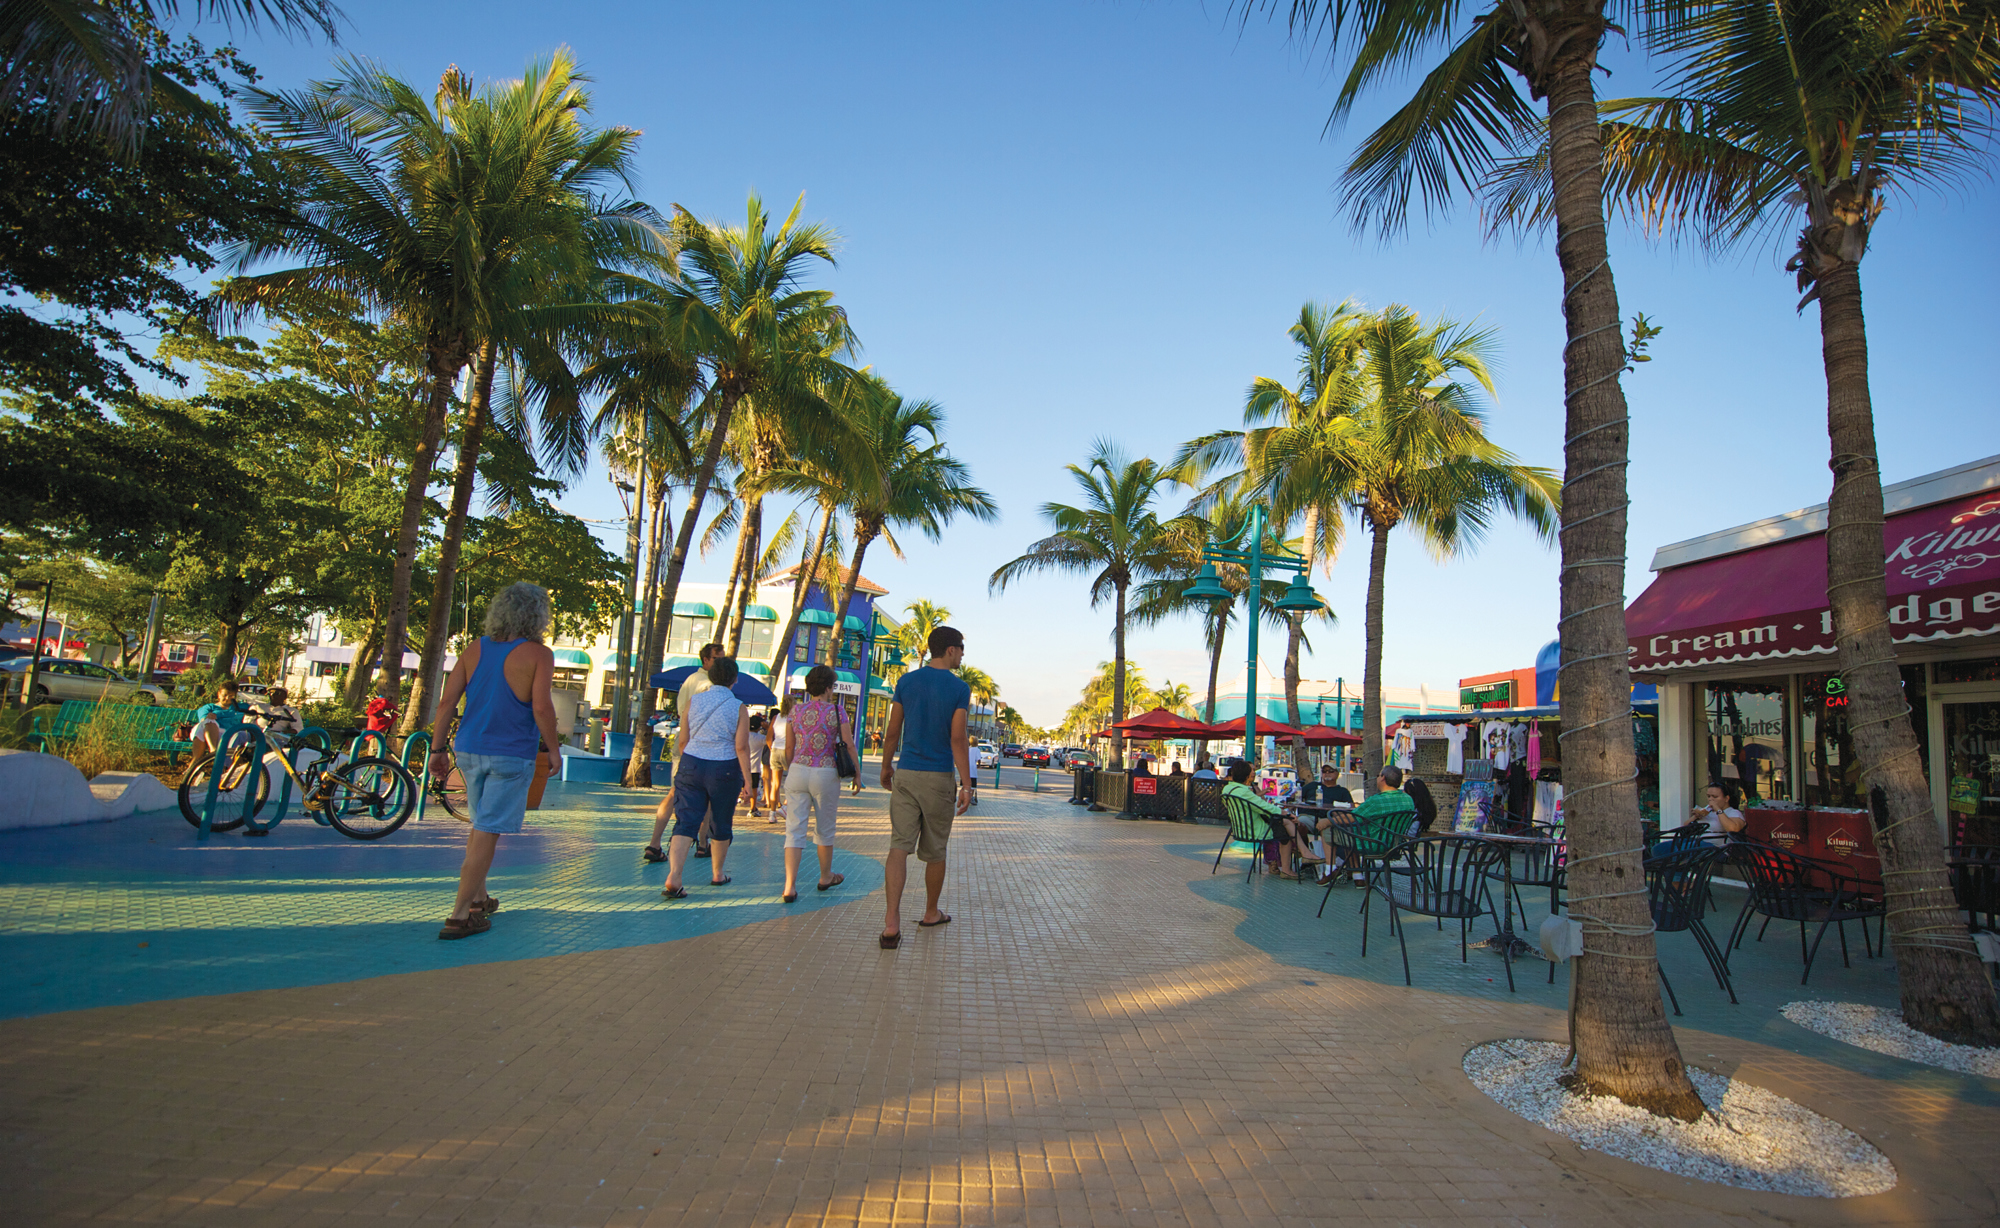 Times Square on Fort Myers Beach is a fun (but noisy!) hangout, boasting live music, street performers, and abundant souvenir and beach and surf shops. (Photo courtesy of Lee County Visitor & Convention Bureau)